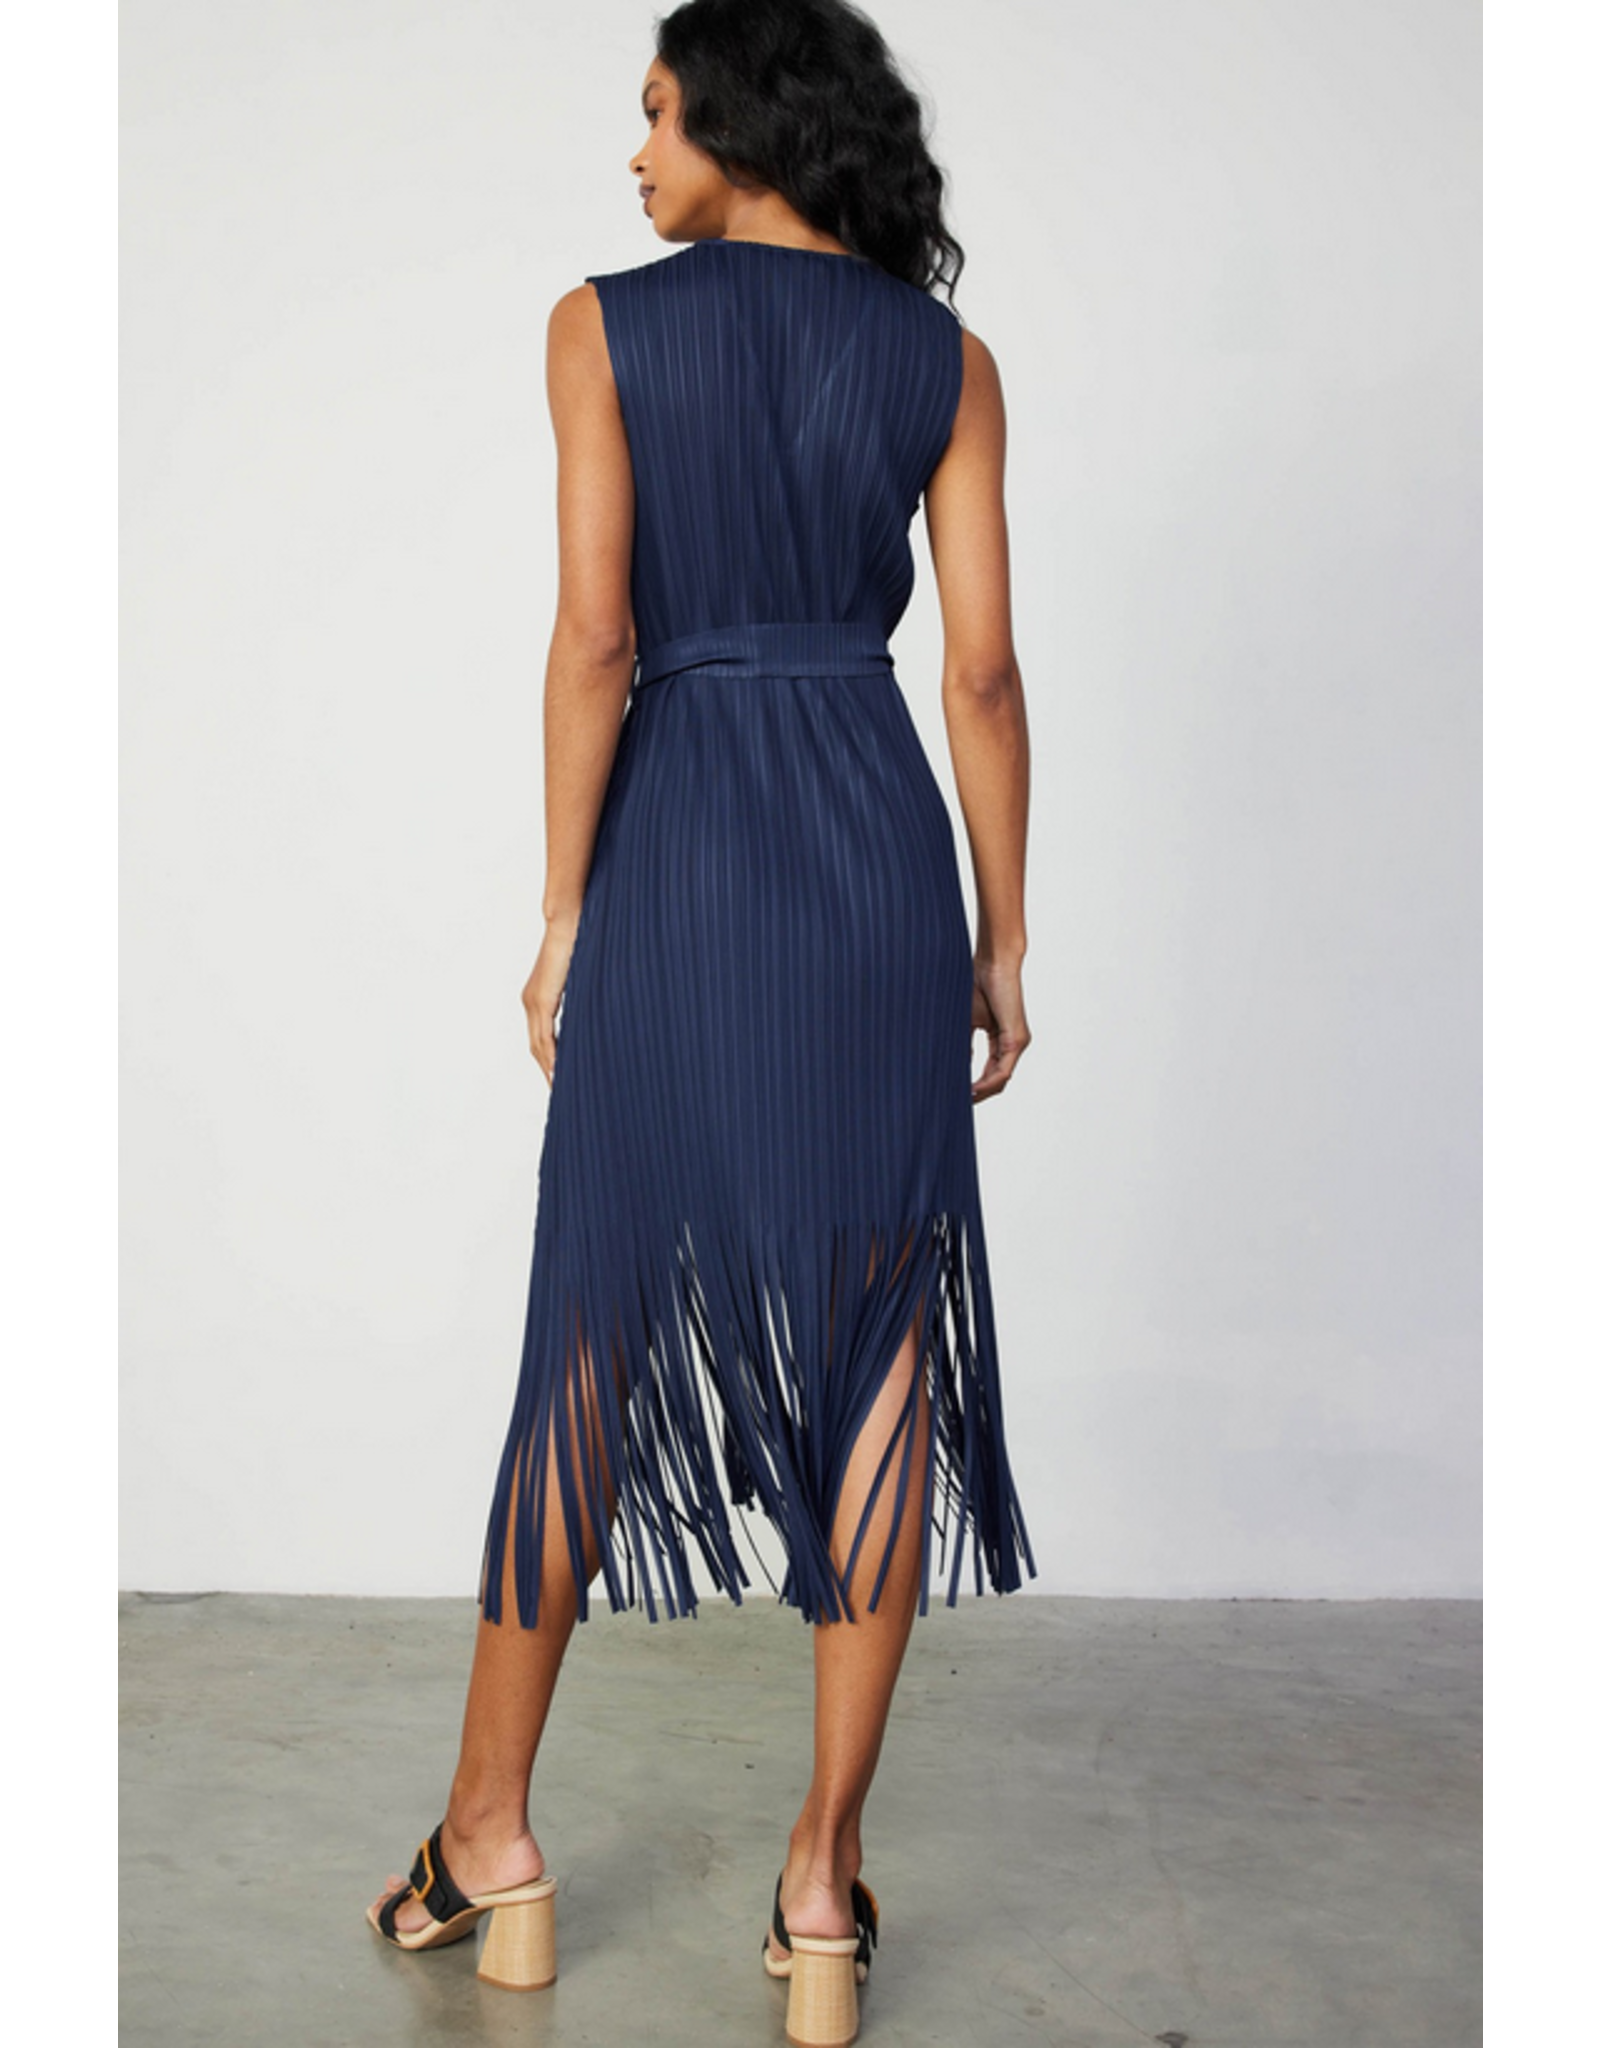 Current Air Sleeveless Pleated Dress with Fringe Detail